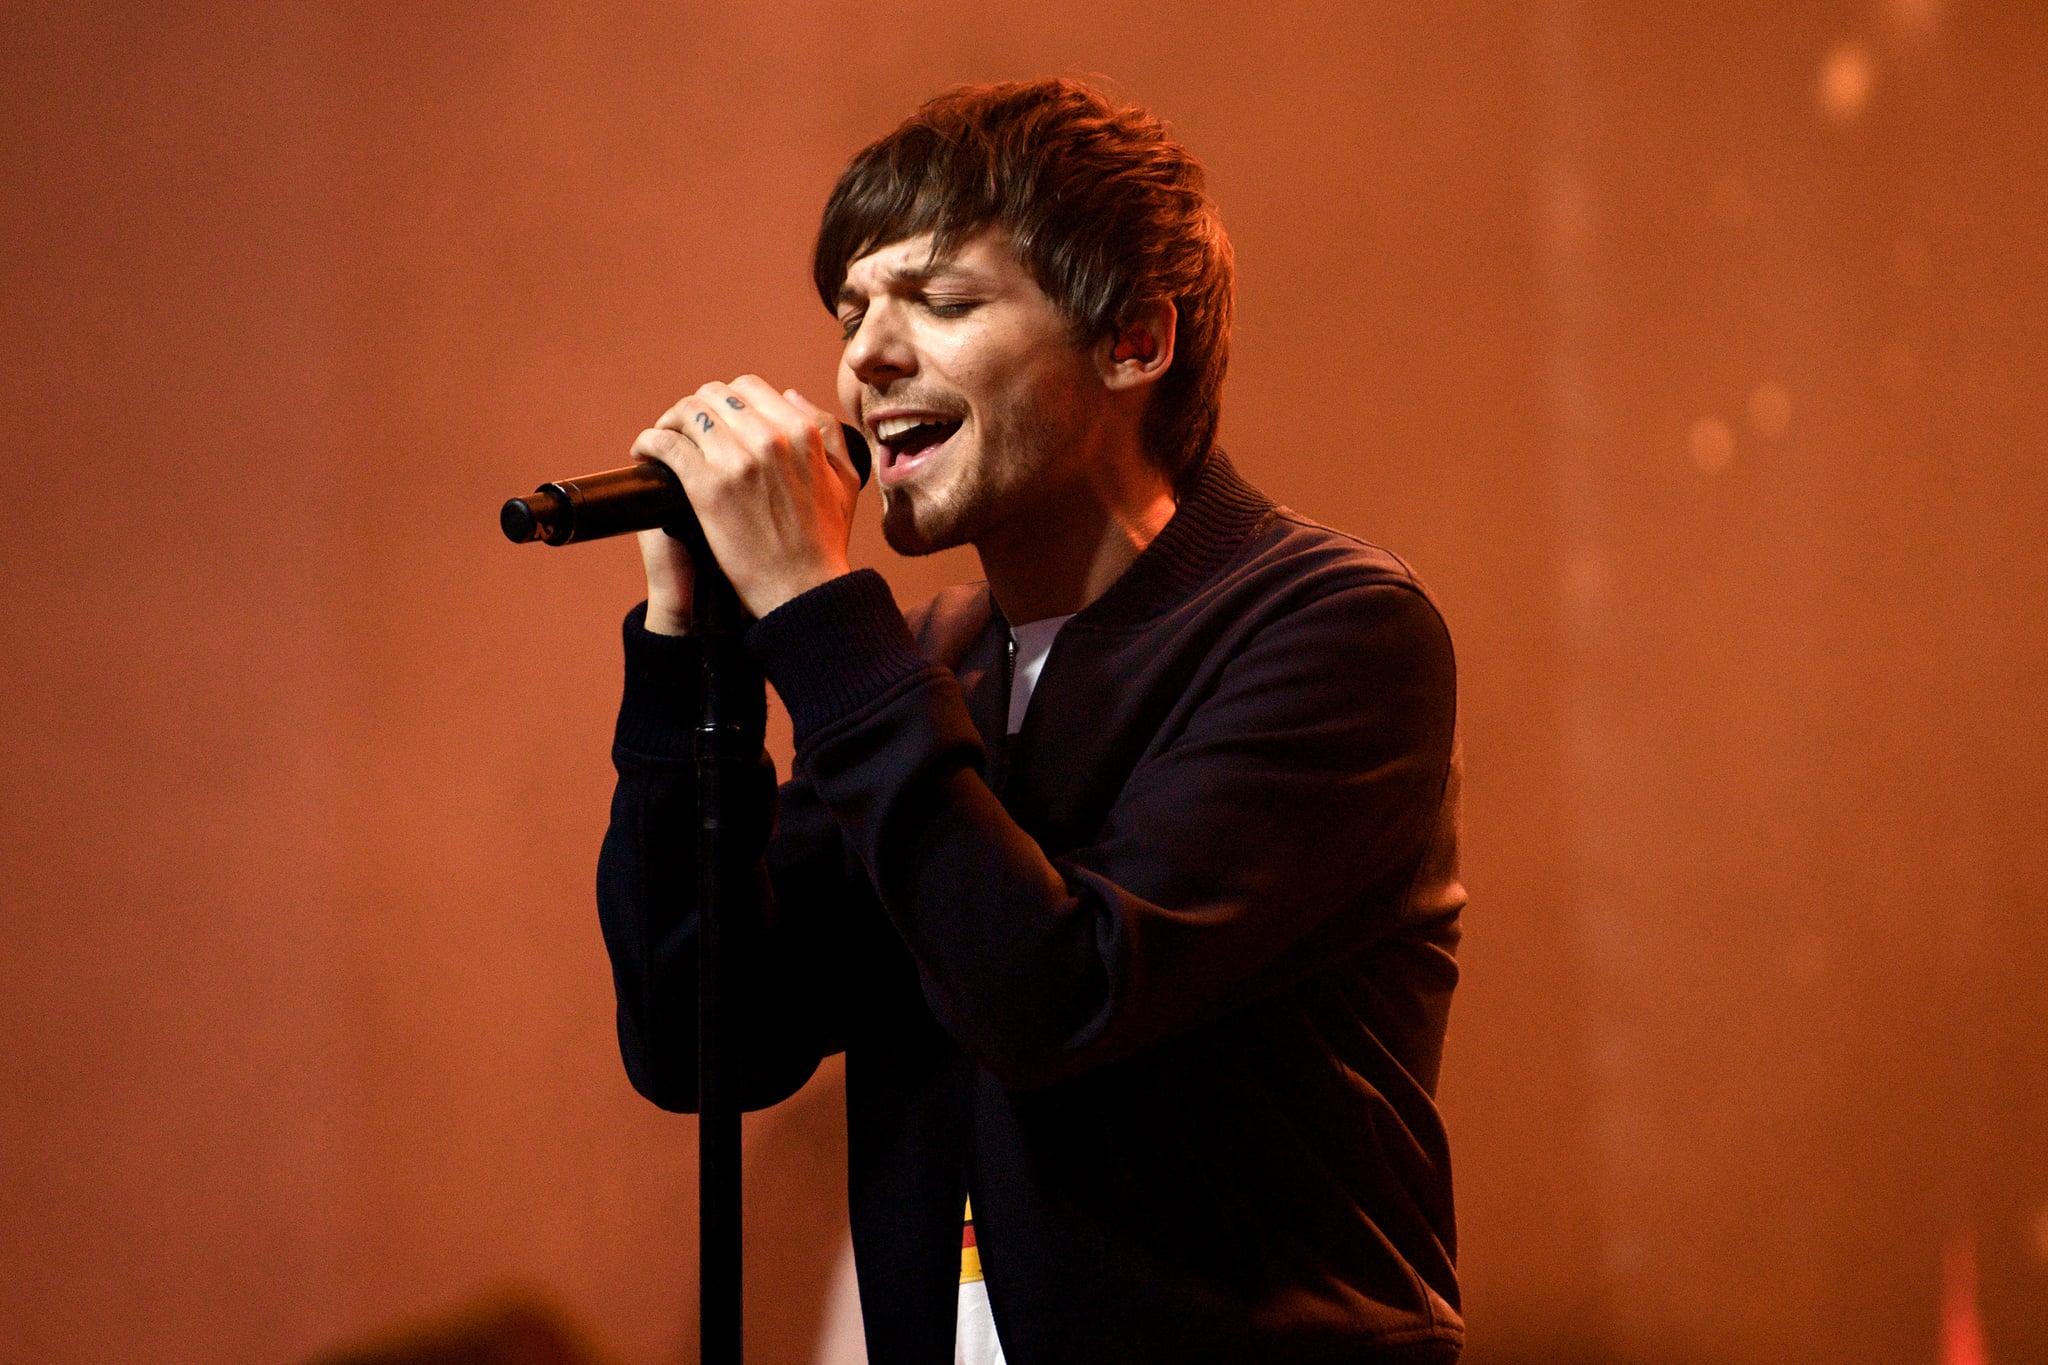 NEW YORK, NEW YORK - DECEMBER 13: Louis Tomlinson performs onstage during the z100 All Access Lounge presented by Poland Spring Pre-Show at Pier 36 on December 13, 2019 in New York City. (Photo by Gary Gershoff/Getty Images for iHeartMedia)